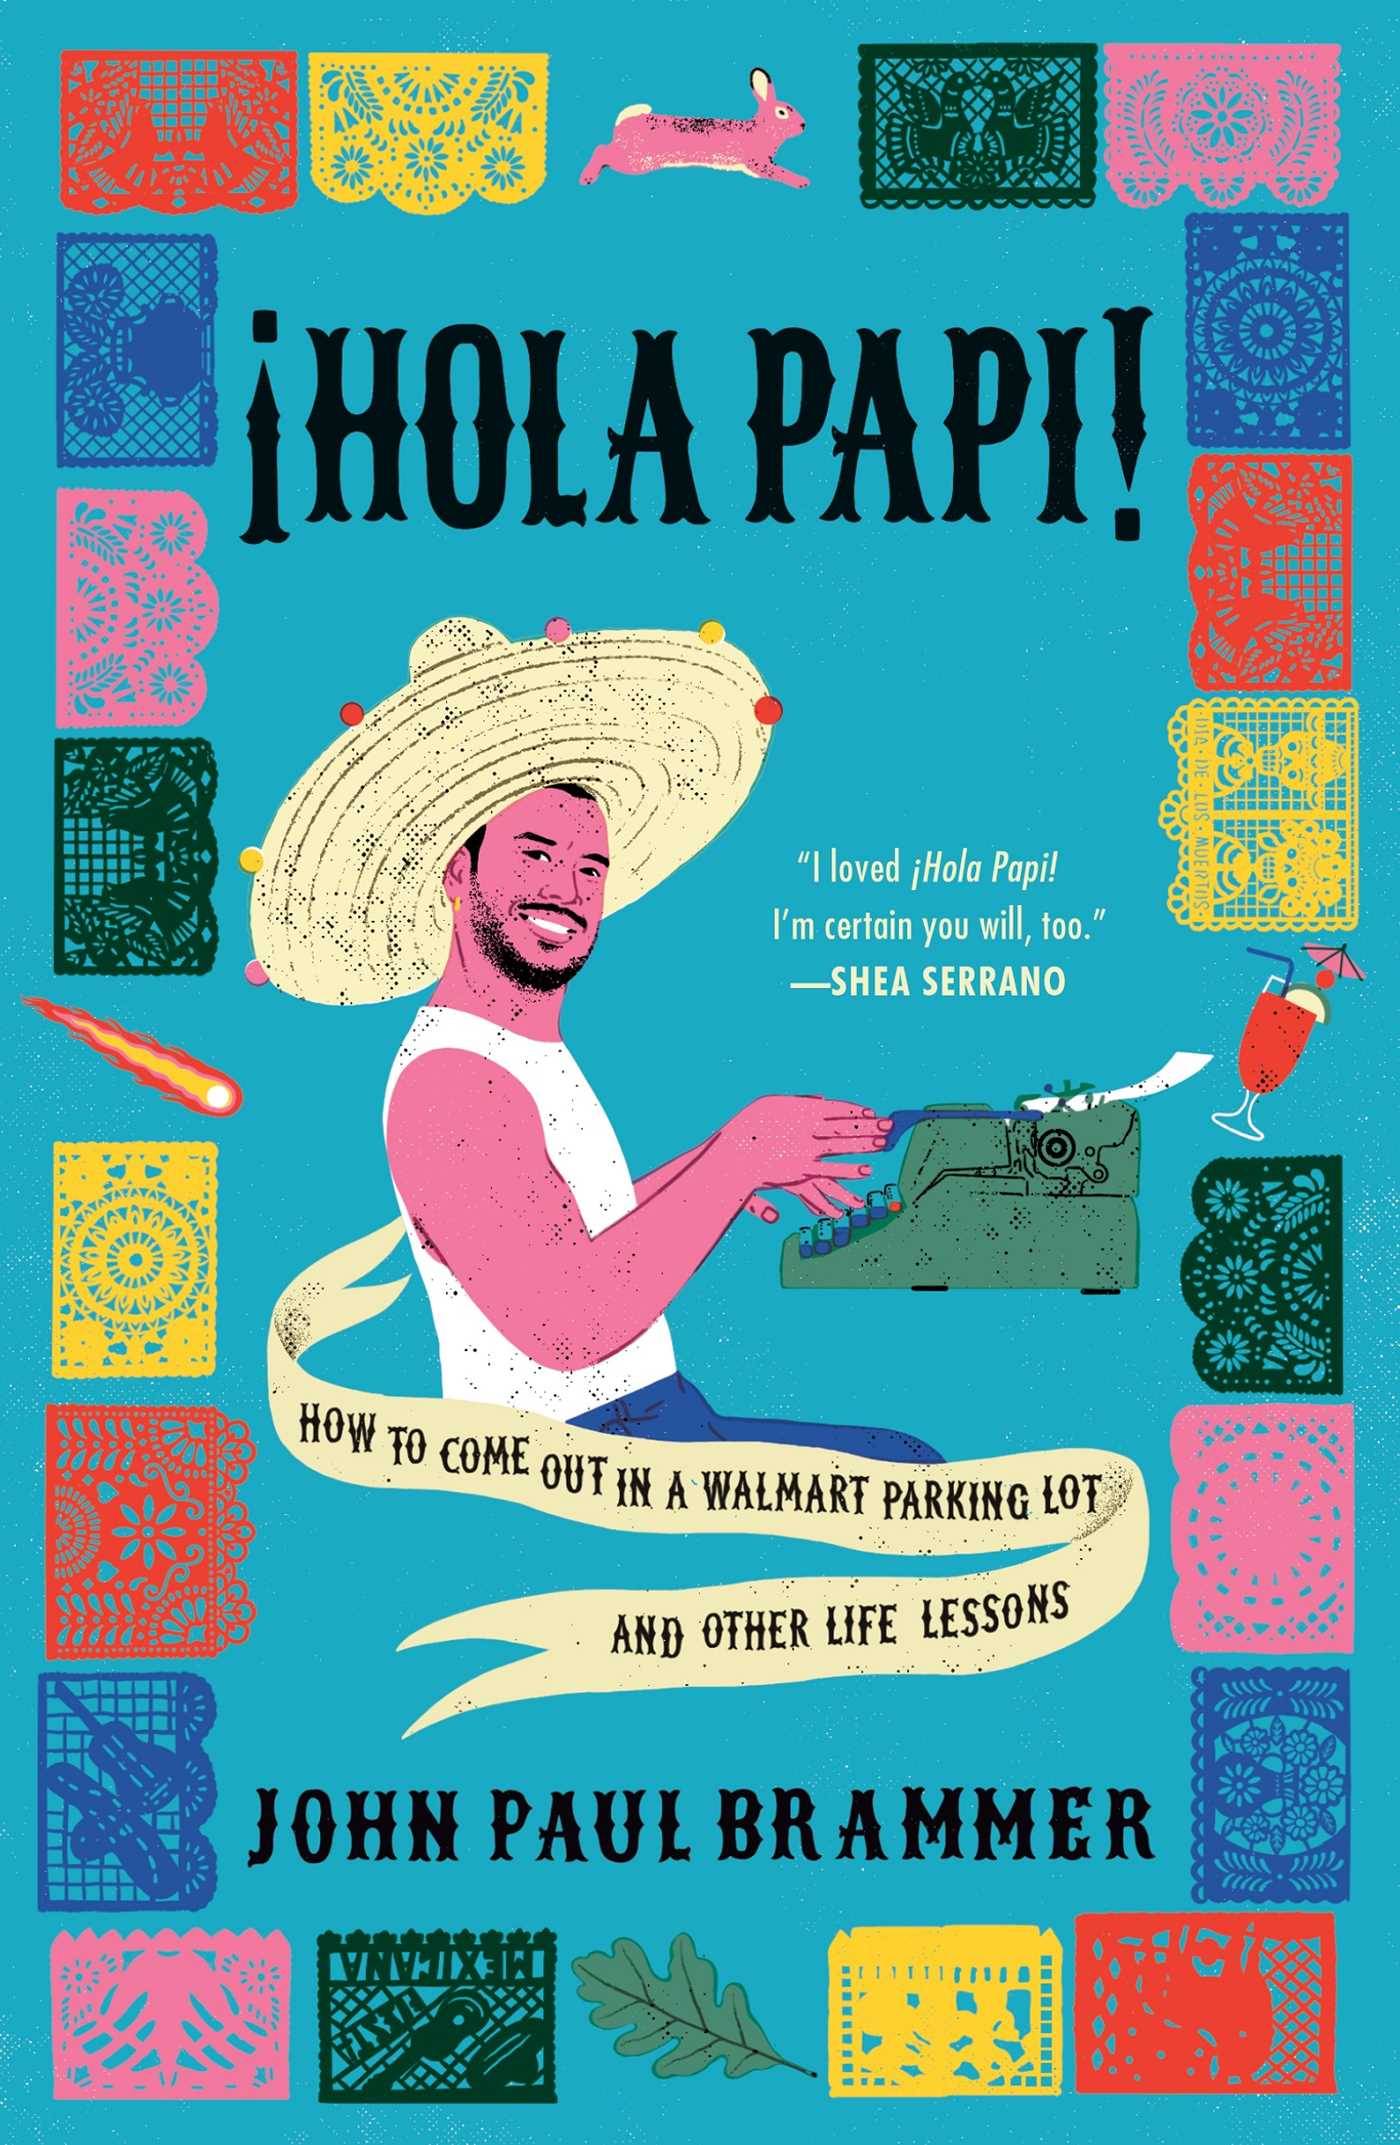 "hola papi" cover featuring an illustration of a smiling man in a sombrero sitting at a typewriter, surrounded by colorful papel picado.